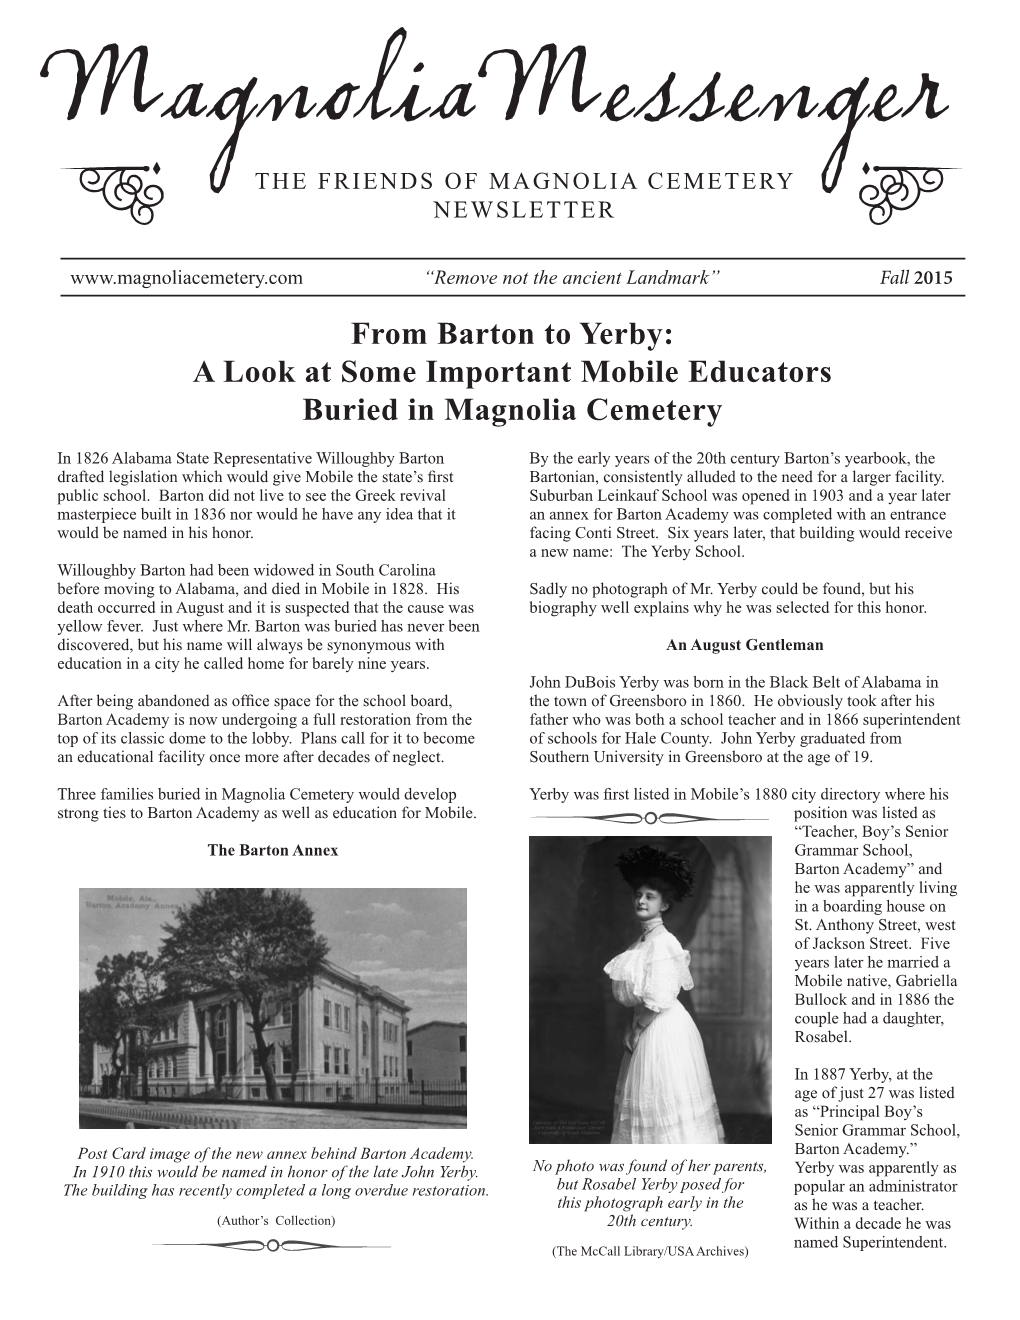 Fall 2015 from Barton to Yerby: a Look at Some Important Mobile Educators Buried in Magnolia Cemetery